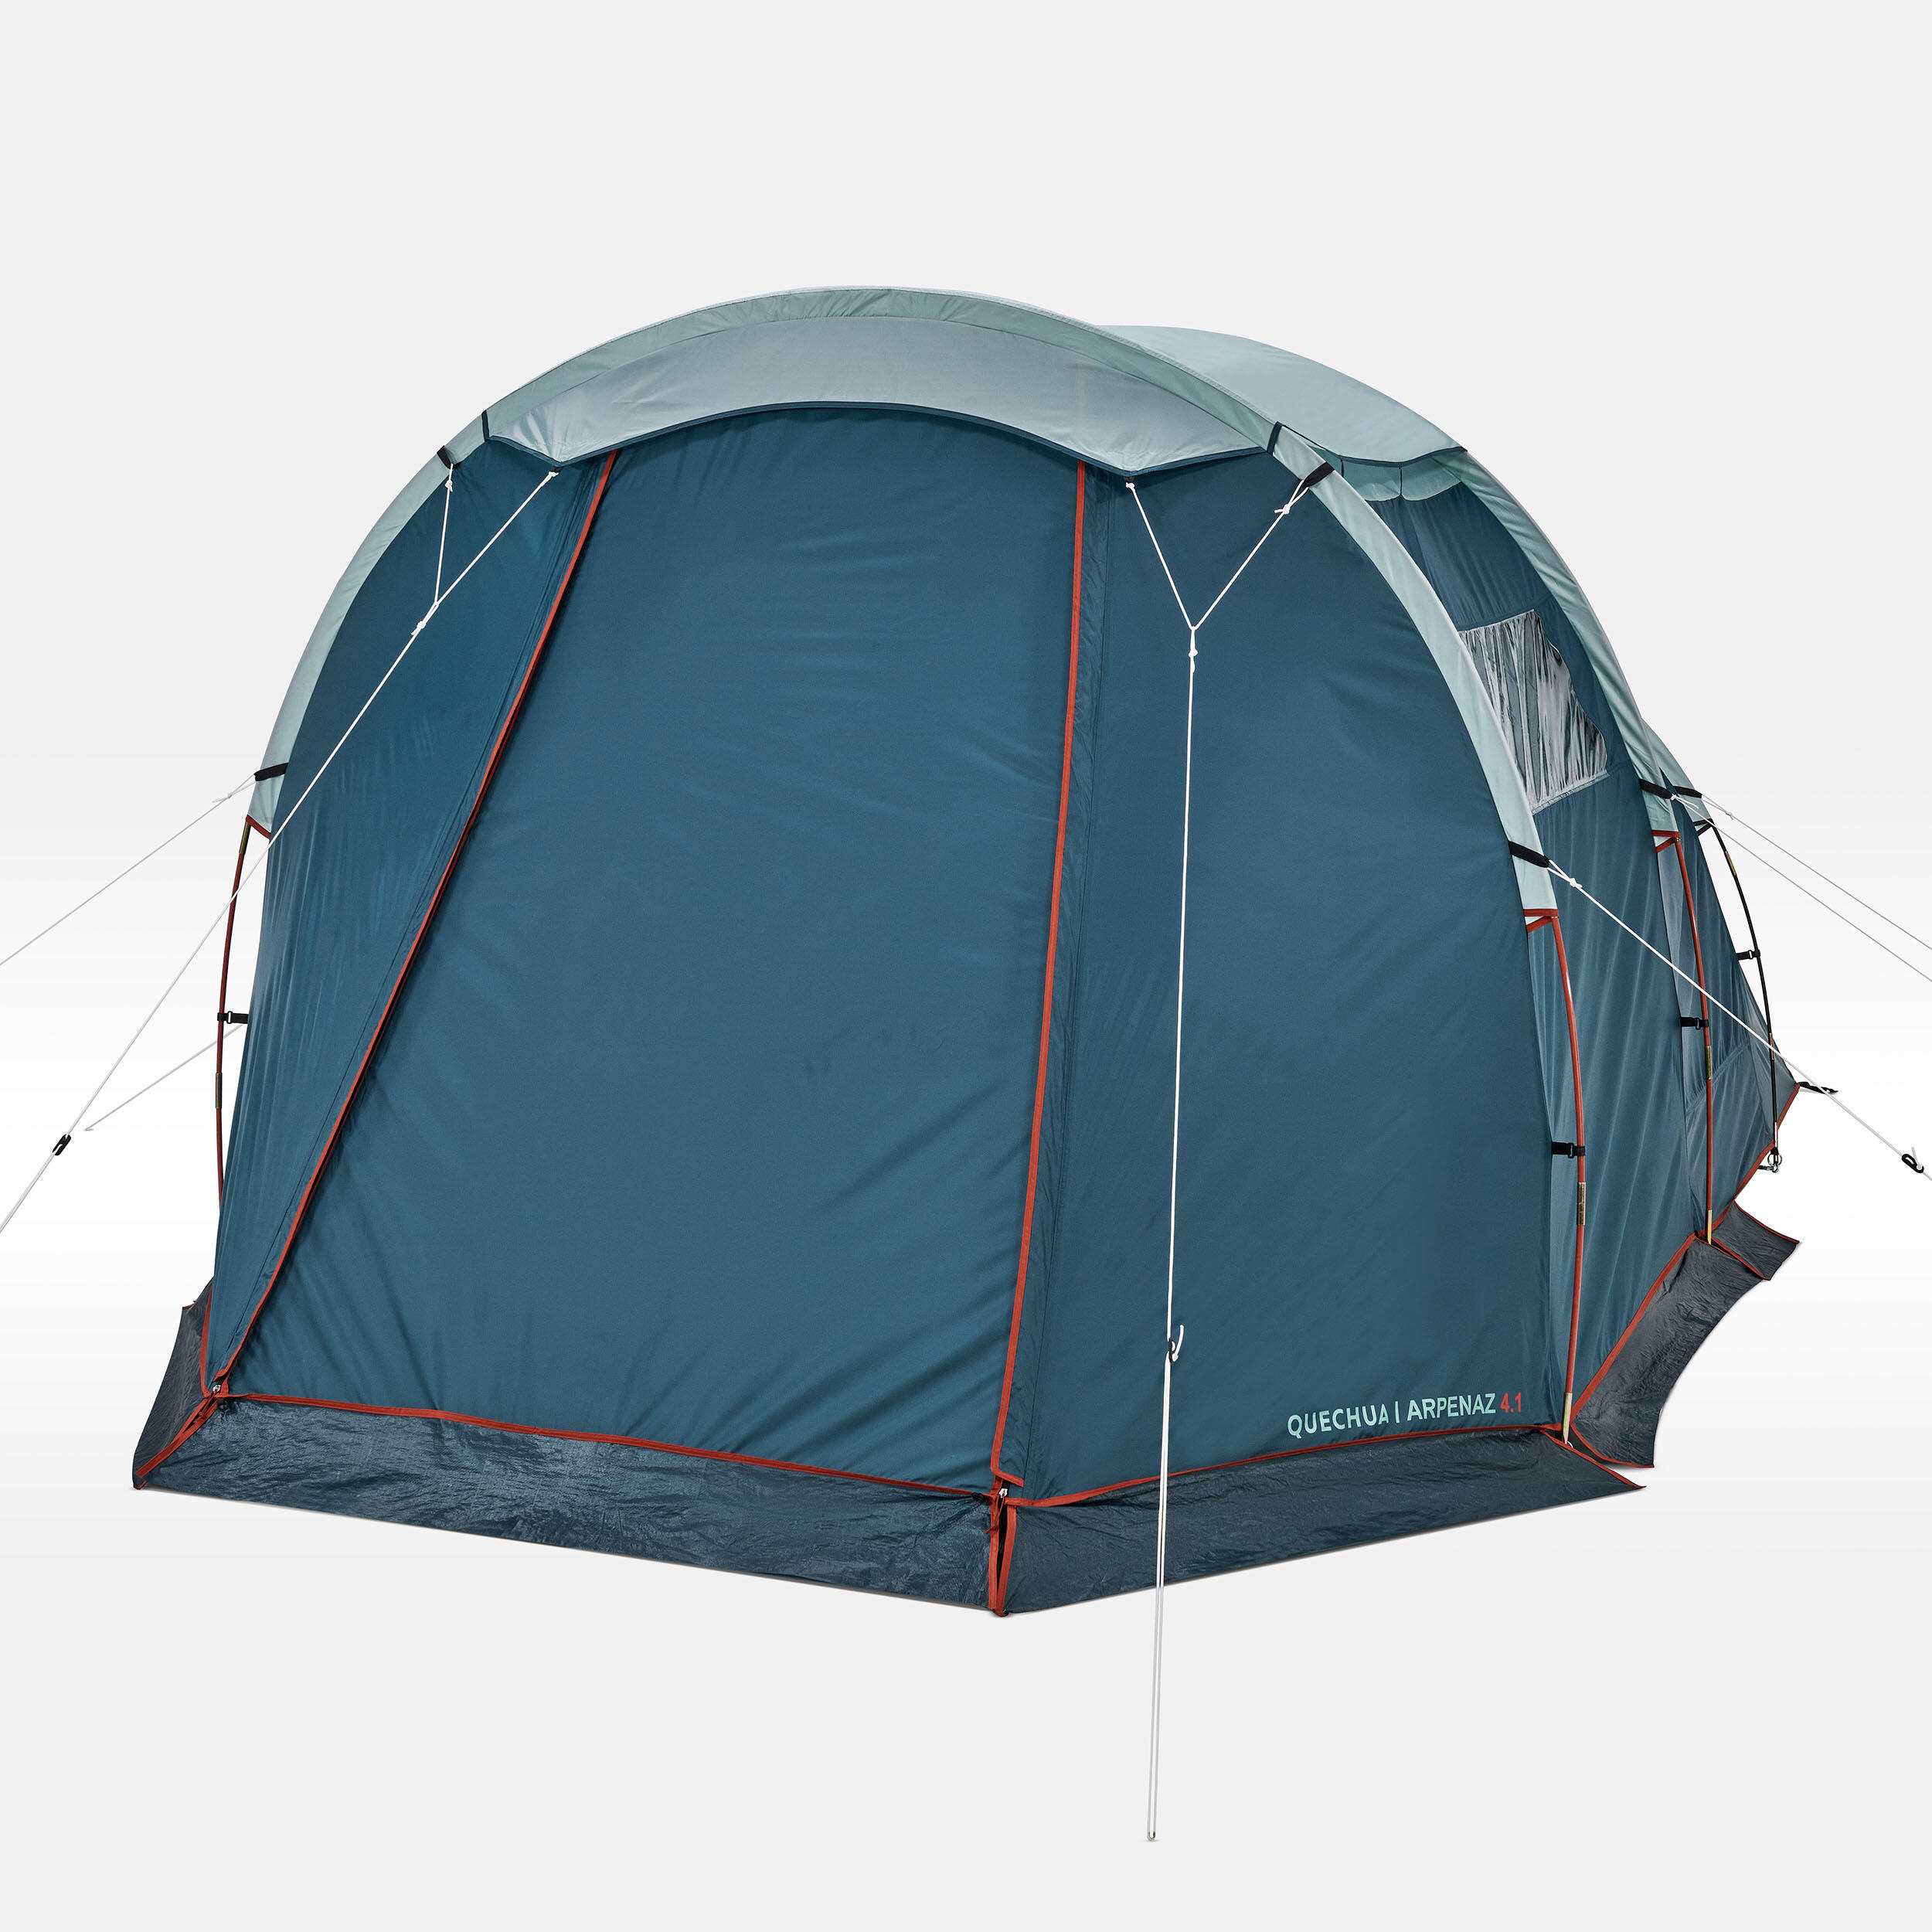 Camping tent with poles - Arpenaz 4.1 - 4 Person - 1 Bedroom 7/22